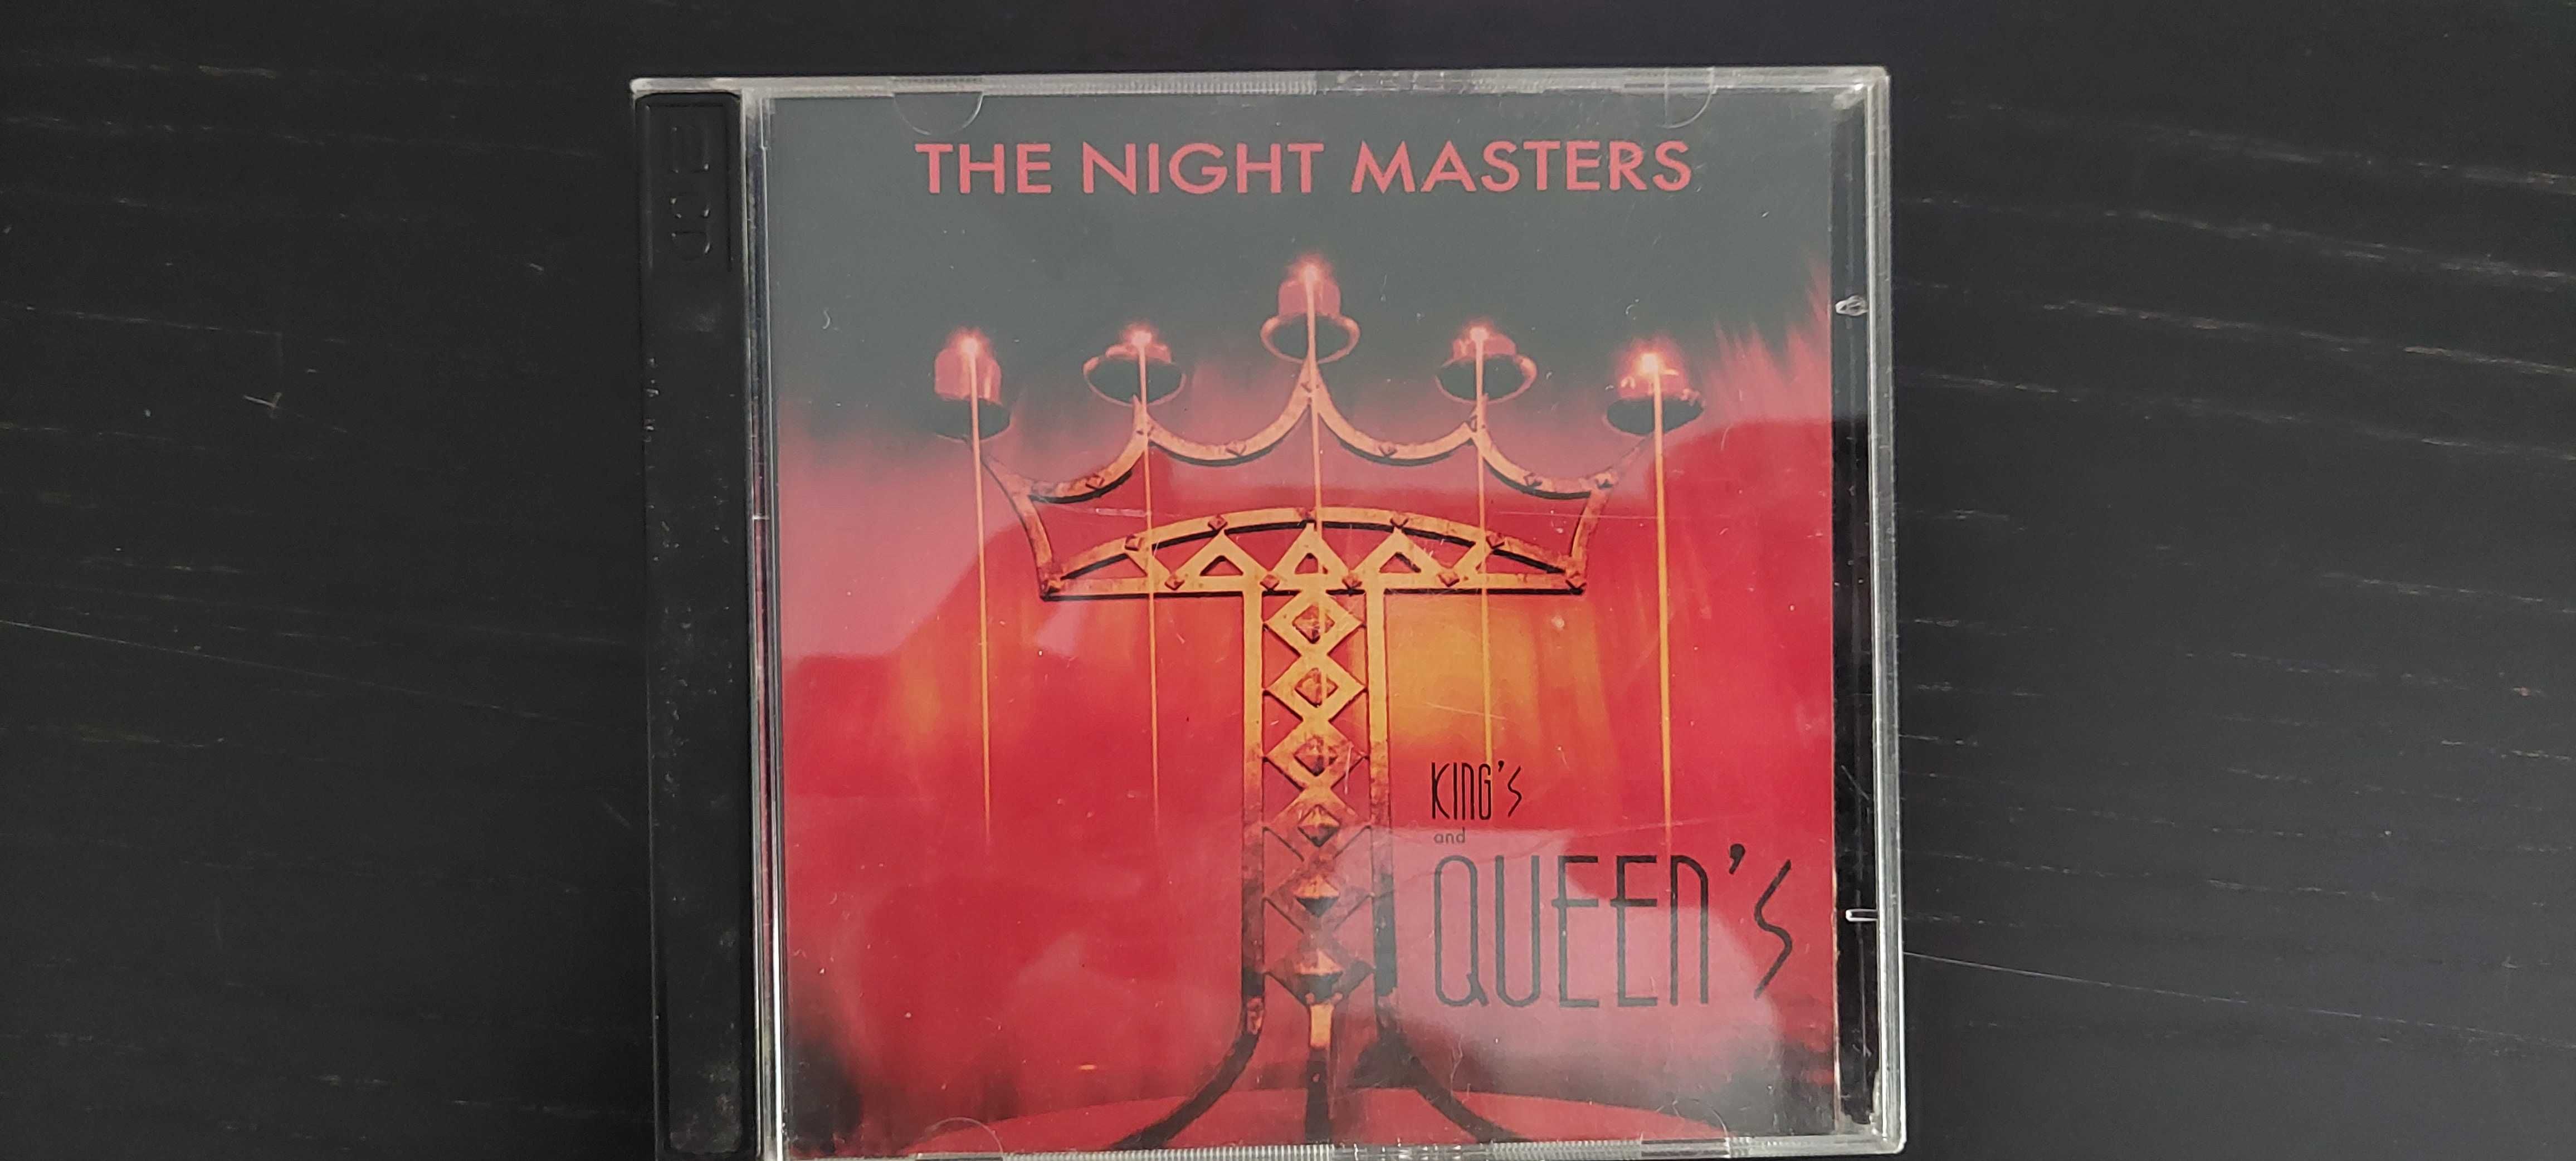 CD Original Kings and Queens - The Night Masters